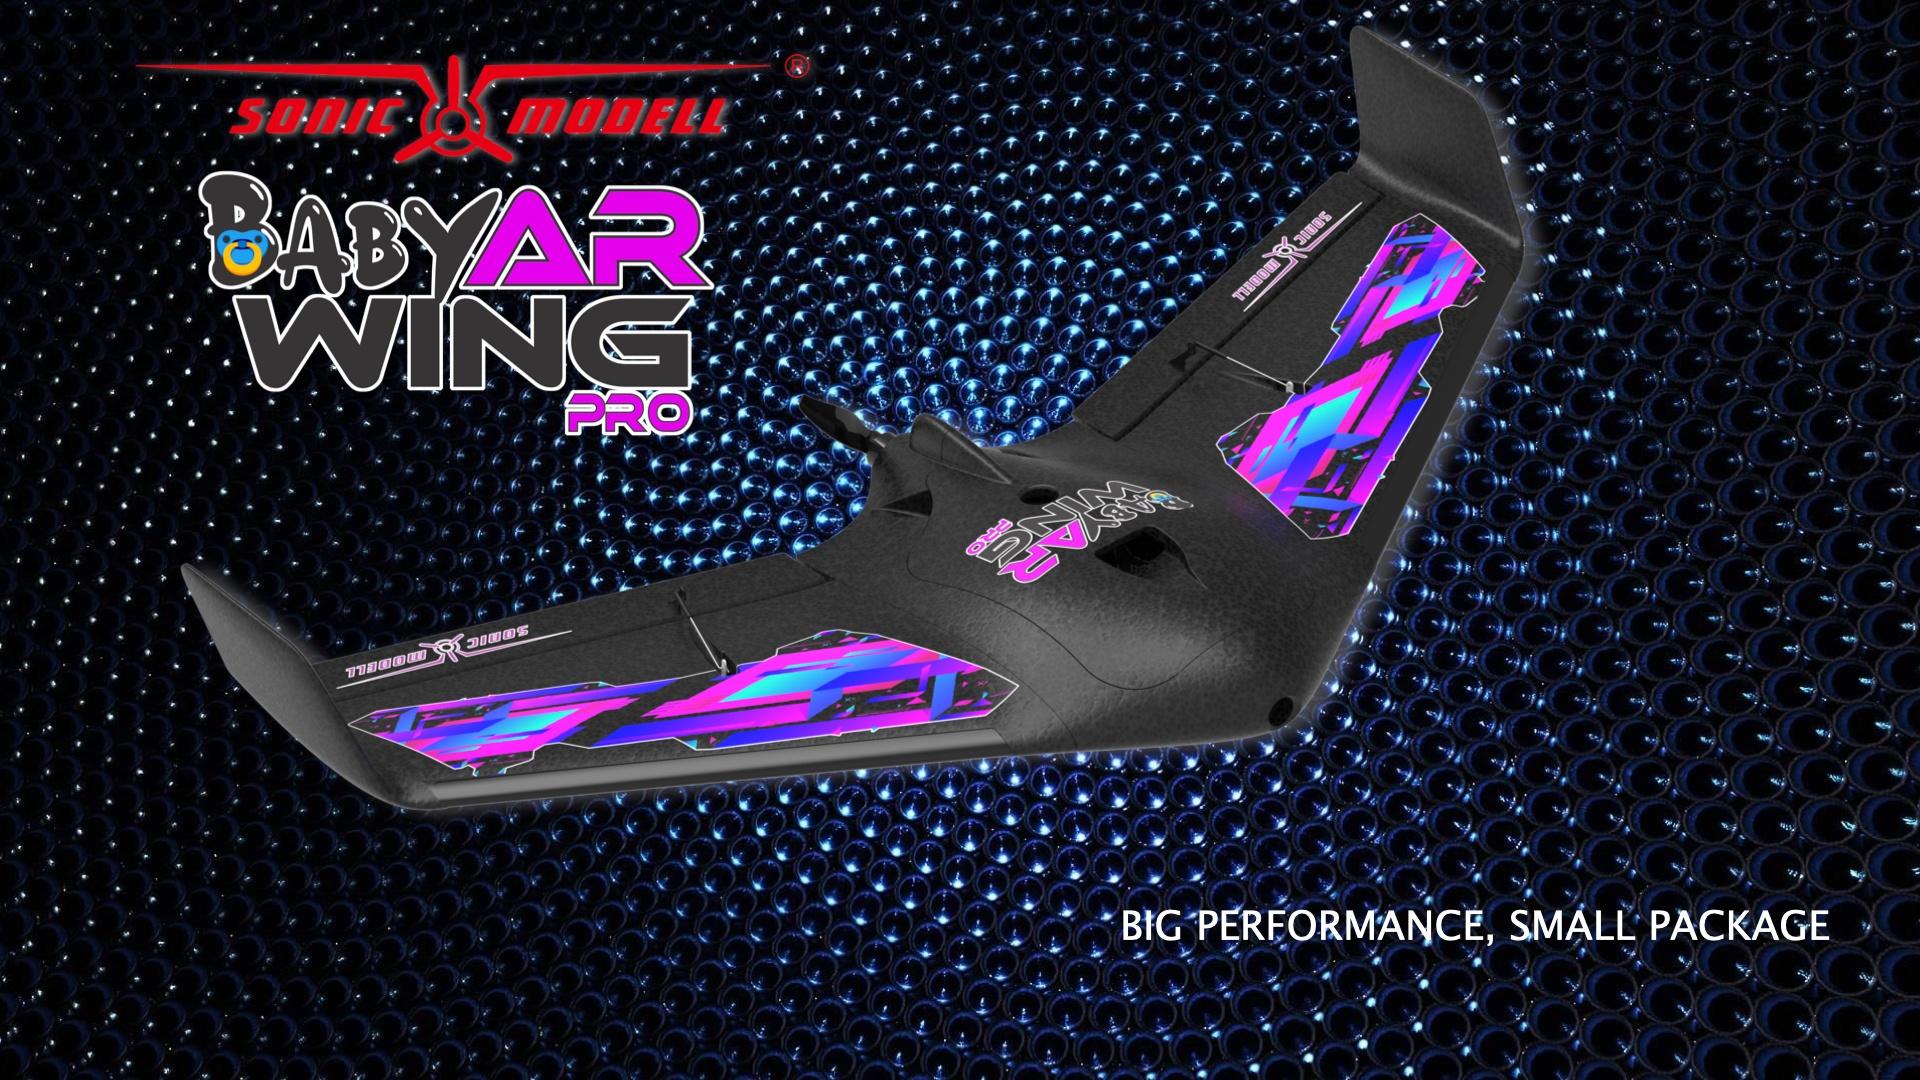 Sonicmodell Baby AR Wing Pro 682mm Wingspan EPP FPV Flying Wing RC Airplane KIT/PNP